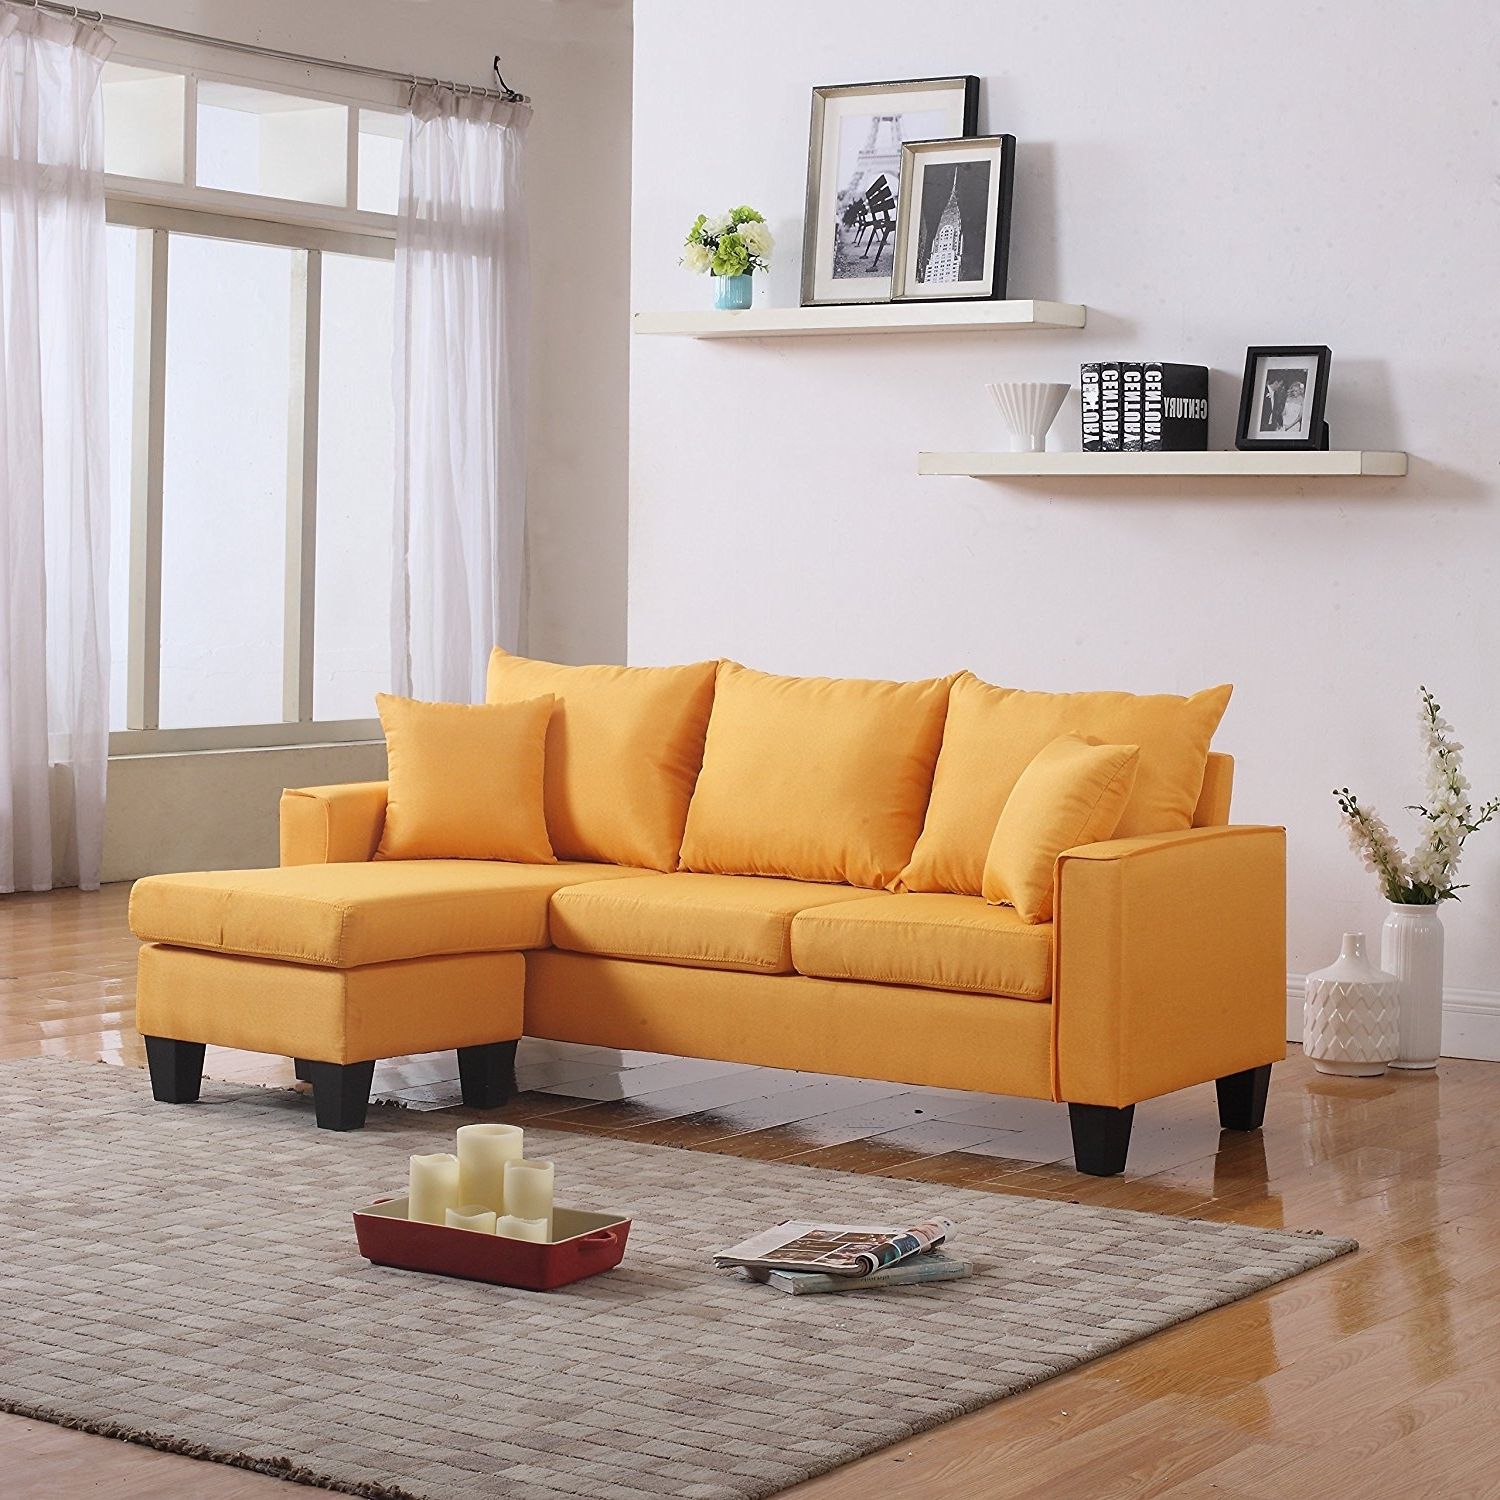 Widely Used Amazon: Modern Linen Fabric Small Space Sectional Sofa With For Small Sectional Sofas For Small Spaces (View 15 of 15)